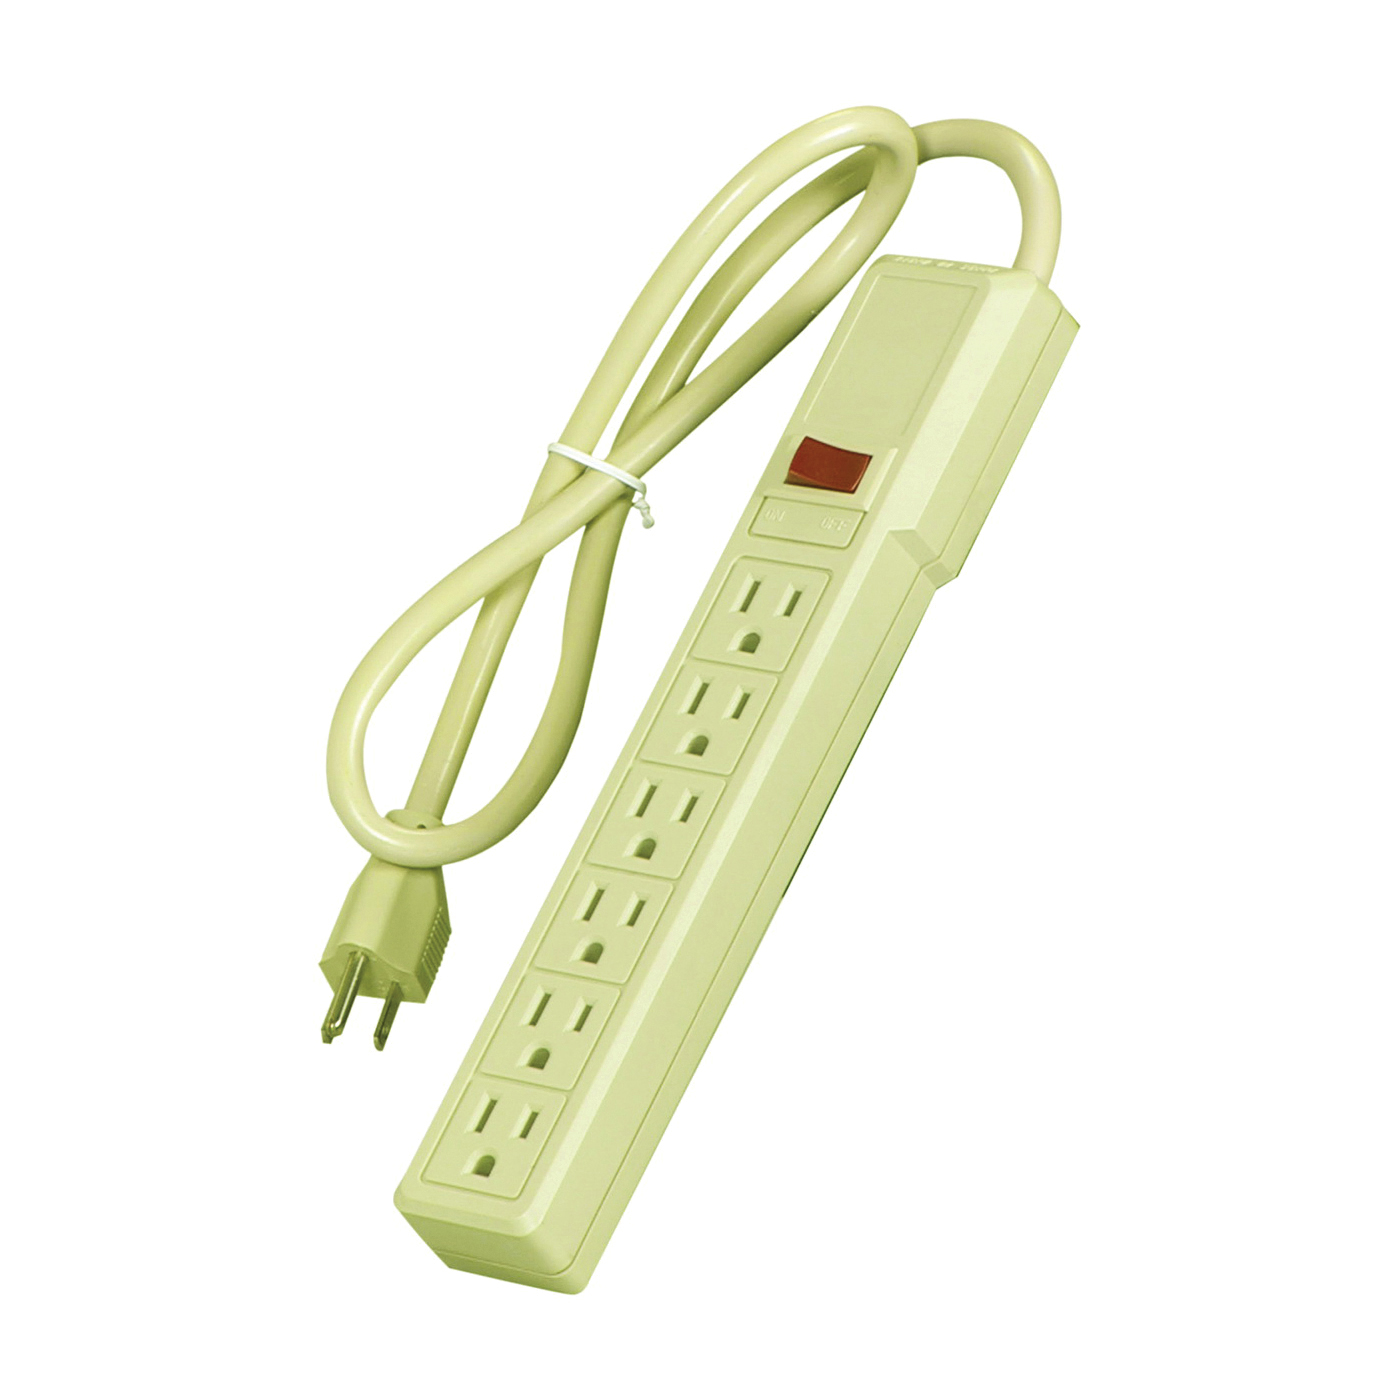 1136V Power Strip, 14/3 AWG Cable, 3 ft L Cable, 6 -Socket, 15 A, 125 V, Ivory